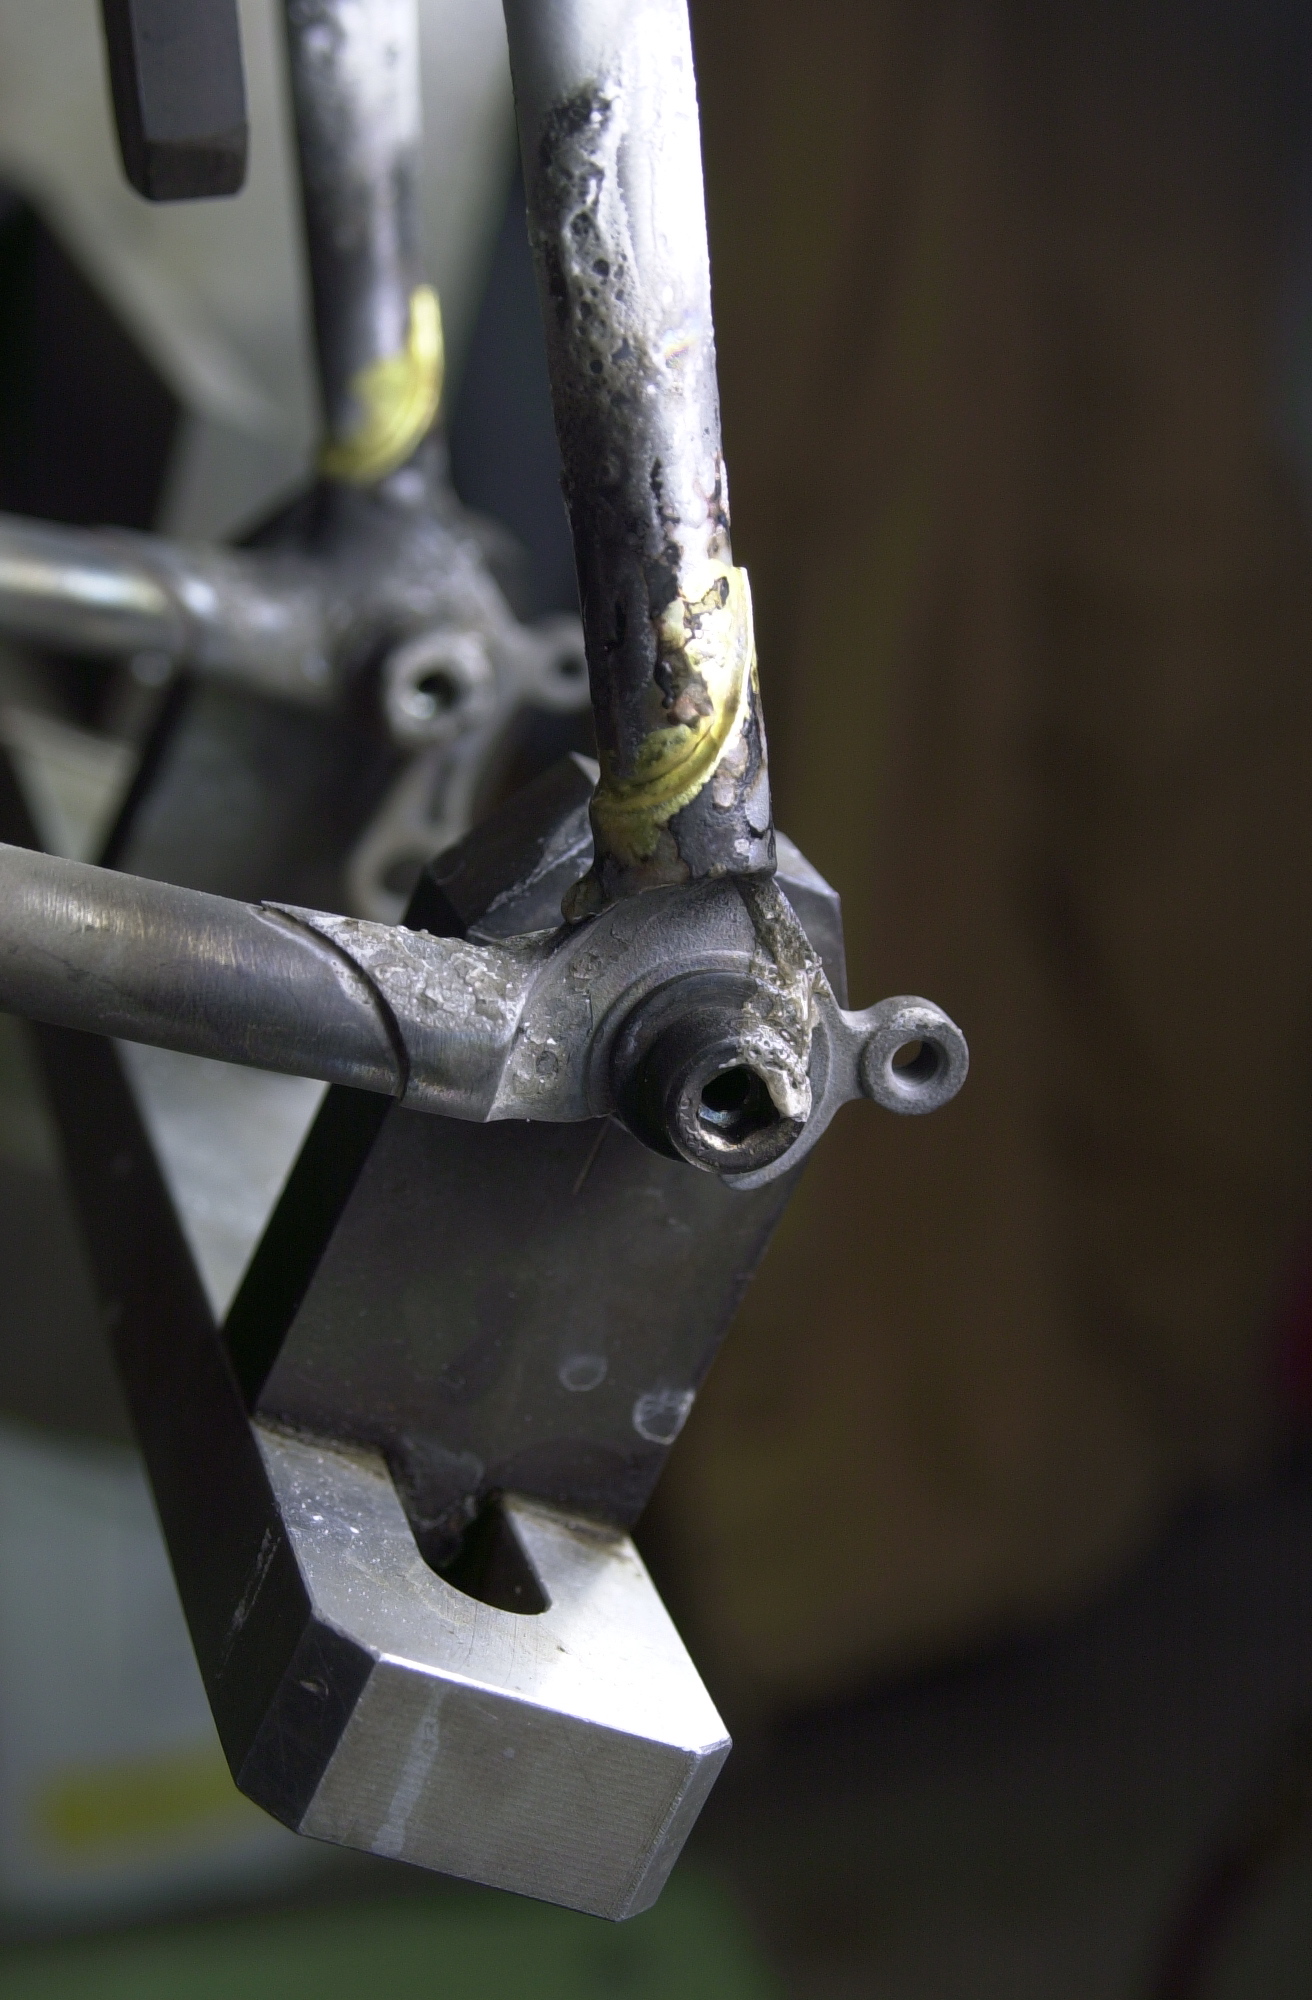 Closeup of the brass brazed seatstay/dropout joint.